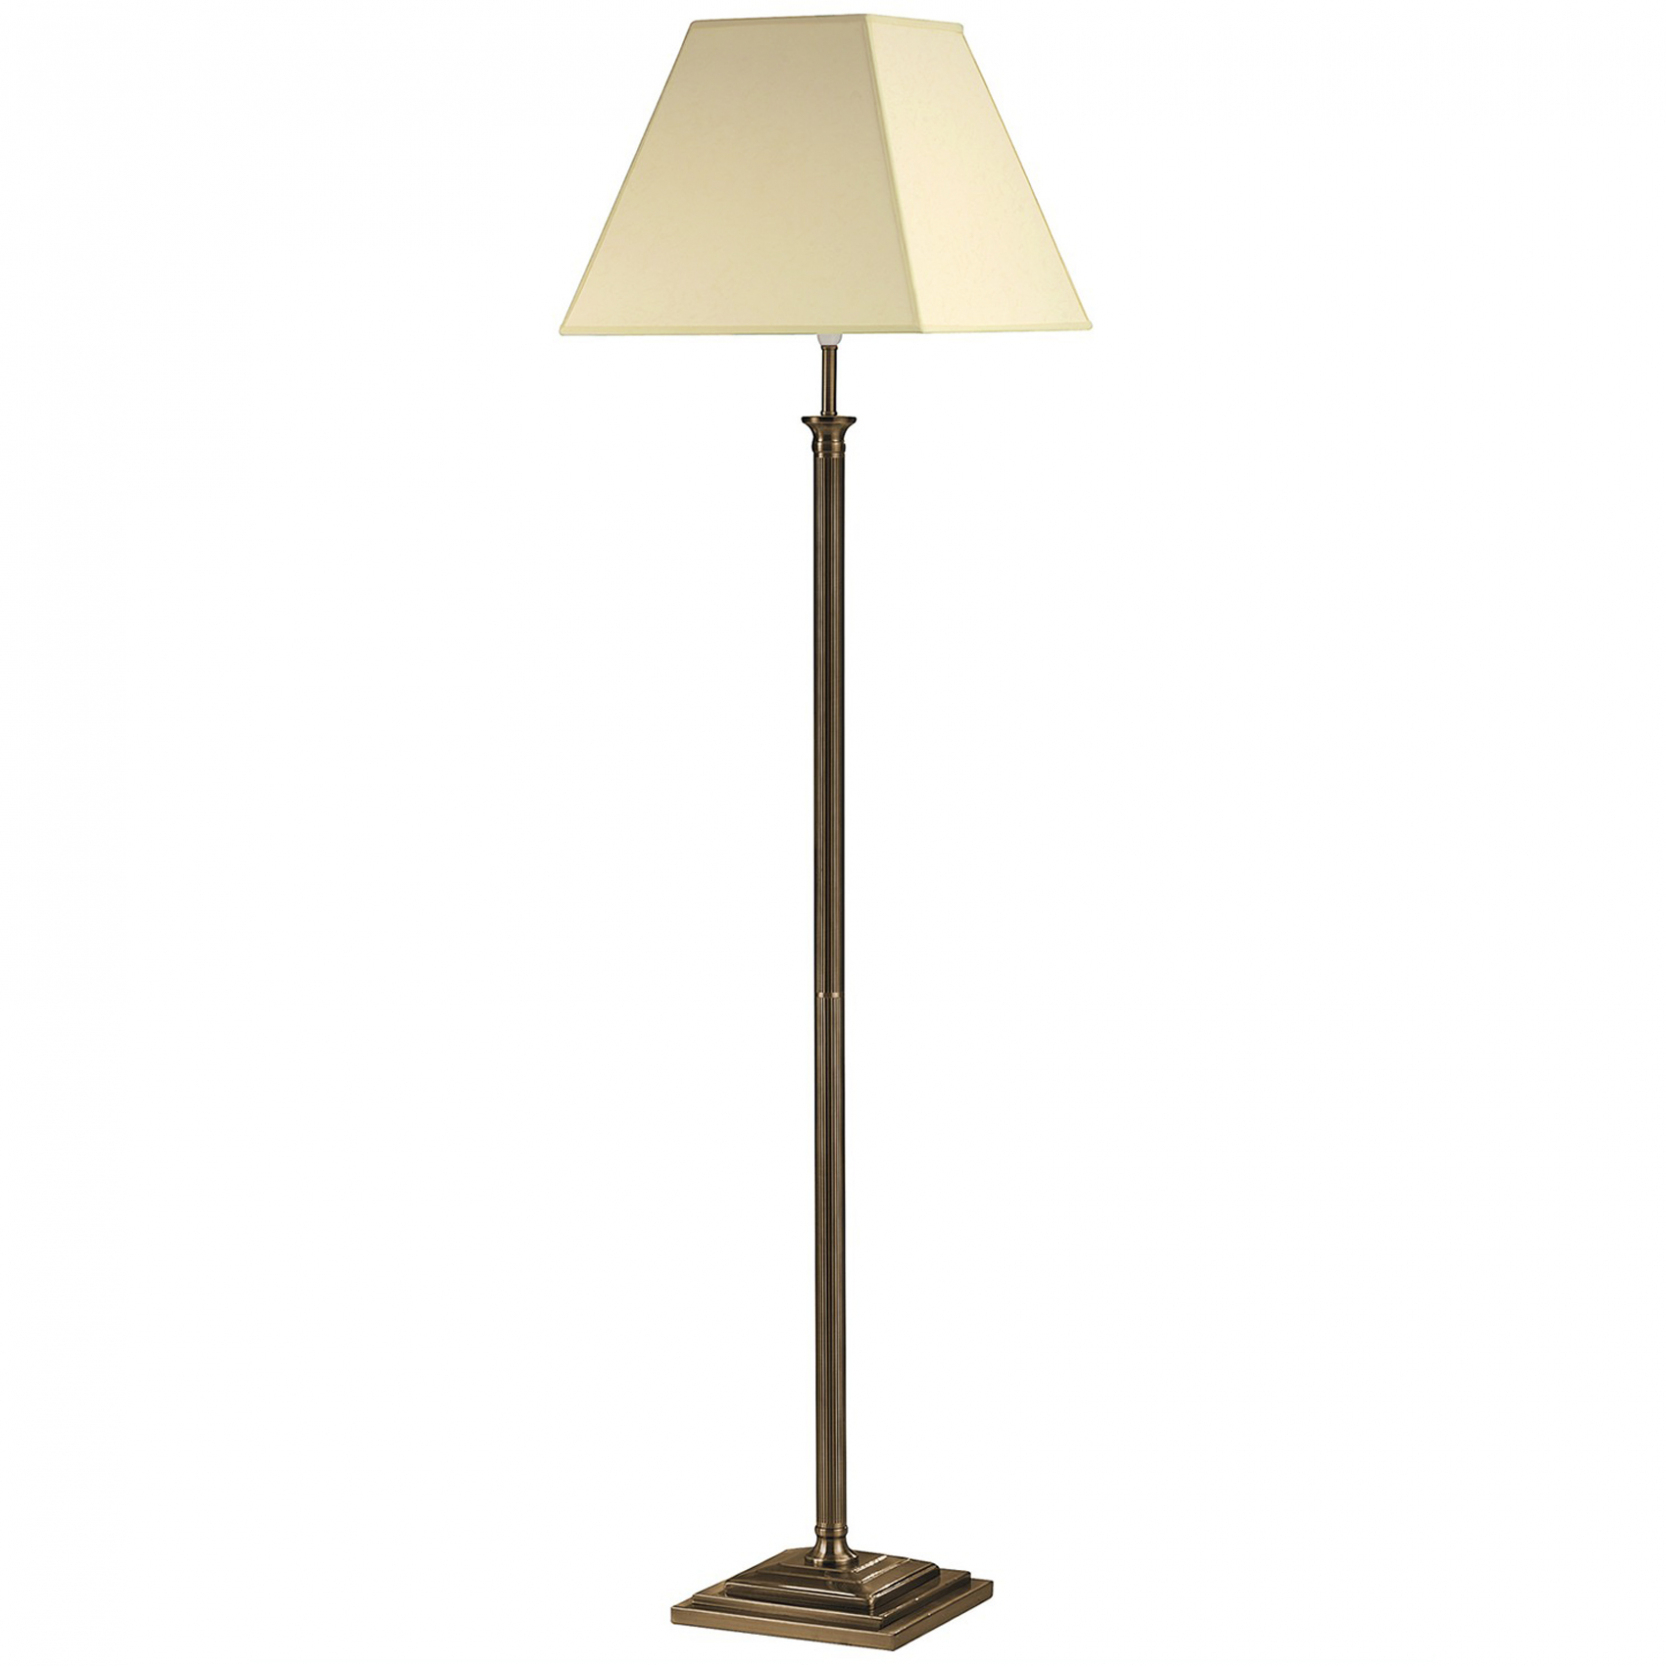 Lighting Lamp Lamps Amazing Floor Lamps At Menards Table inside size 1666 X 1666